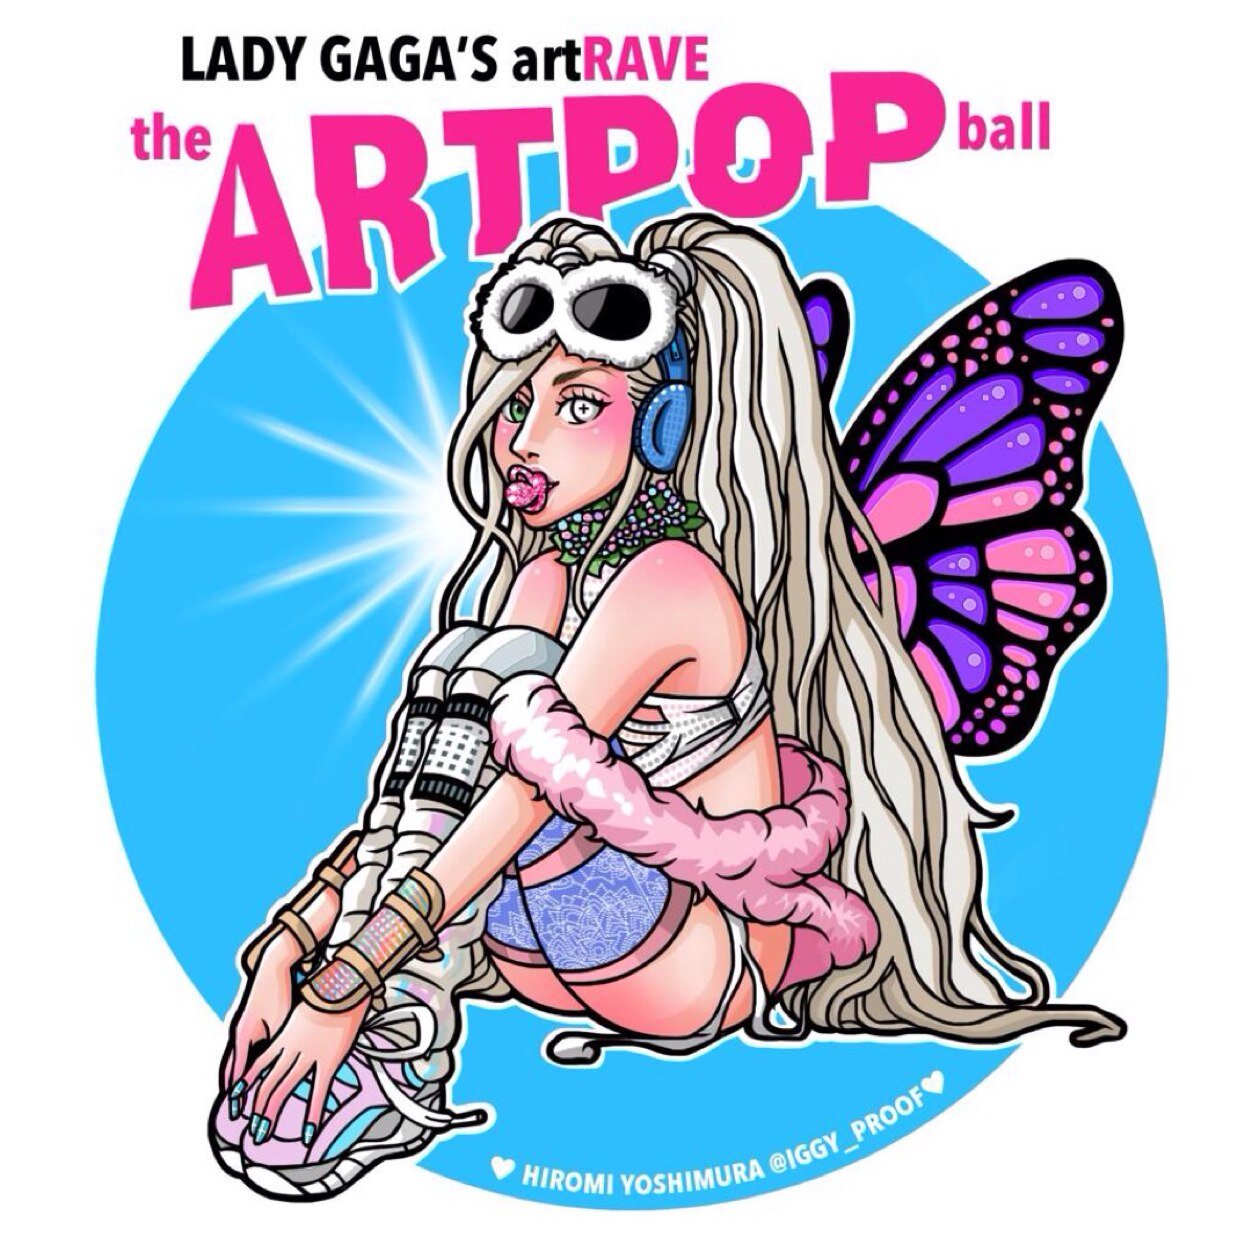 we thank all the fans who were flood in Artpop and artrave !!! it was a magic experience !!! thank you again for all #PawsUp